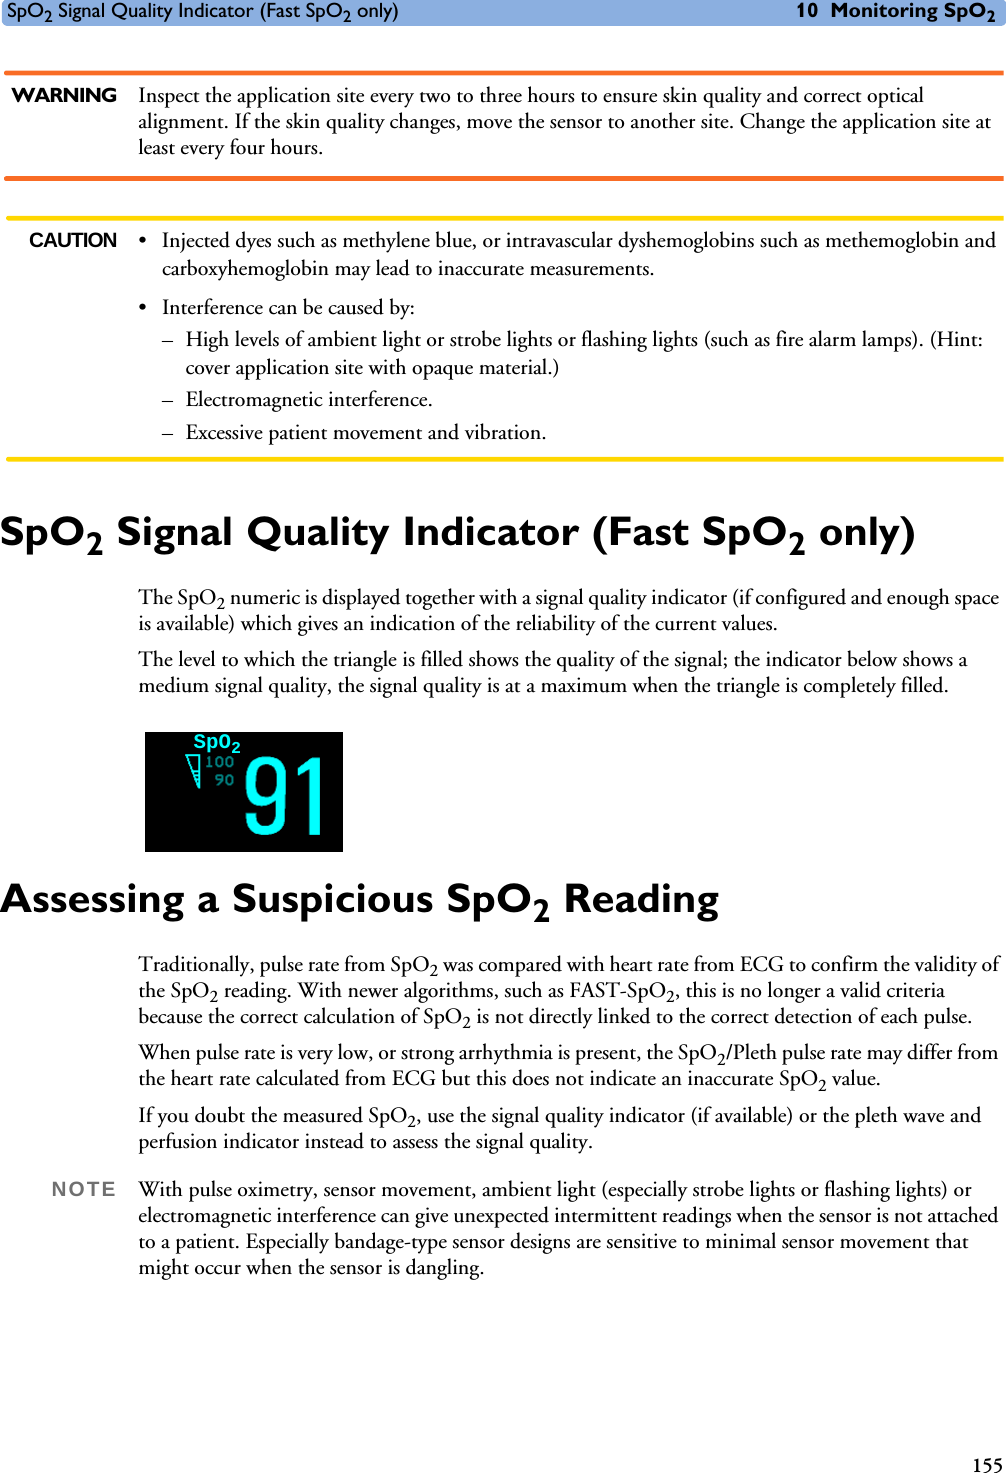 SpO2 Signal Quality Indicator (Fast SpO2 only) 10 Monitoring SpO2155WARNING Inspect the application site every two to three hours to ensure skin quality and correct optical alignment. If the skin quality changes, move the sensor to another site. Change the application site at least every four hours.CAUTION • Injected dyes such as methylene blue, or intravascular dyshemoglobins such as methemoglobin and carboxyhemoglobin may lead to inaccurate measurements.• Interference can be caused by:– High levels of ambient light or strobe lights or flashing lights (such as fire alarm lamps). (Hint: cover application site with opaque material.)– Electromagnetic interference.– Excessive patient movement and vibration.SpO2 Signal Quality Indicator (Fast SpO2 only)The SpO2 numeric is displayed together with a signal quality indicator (if configured and enough space is available) which gives an indication of the reliability of the current values. The level to which the triangle is filled shows the quality of the signal; the indicator below shows a medium signal quality, the signal quality is at a maximum when the triangle is completely filled.Assessing a Suspicious SpO2 ReadingTraditionally, pulse rate from SpO2 was compared with heart rate from ECG to confirm the validity of the SpO2 reading. With newer algorithms, such as FAST-SpO2, this is no longer a valid criteria because the correct calculation of SpO2 is not directly linked to the correct detection of each pulse. When pulse rate is very low, or strong arrhythmia is present, the SpO2/Pleth pulse rate may differ from the heart rate calculated from ECG but this does not indicate an inaccurate SpO2 value.If you doubt the measured SpO2, use the signal quality indicator (if available) or the pleth wave and perfusion indicator instead to assess the signal quality.NOTE With pulse oximetry, sensor movement, ambient light (especially strobe lights or flashing lights) or electromagnetic interference can give unexpected intermittent readings when the sensor is not attached to a patient. Especially bandage-type sensor designs are sensitive to minimal sensor movement that might occur when the sensor is dangling. SpO2